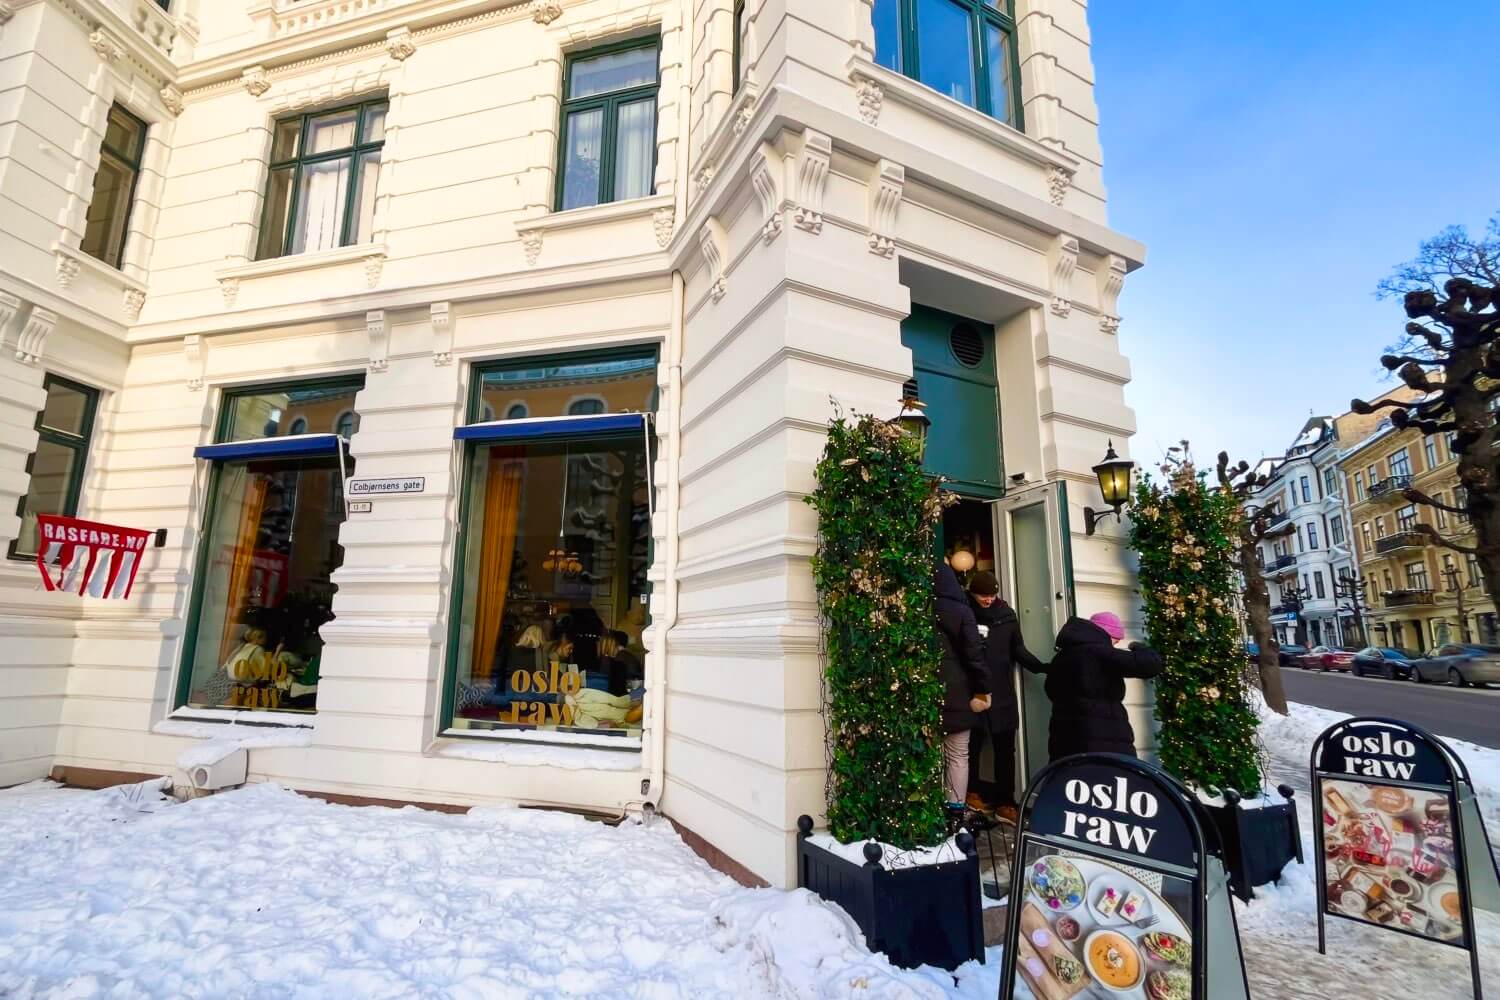 Exterior shot of Oslo Raw, a 100% vegan eatery in Oslo, Norway